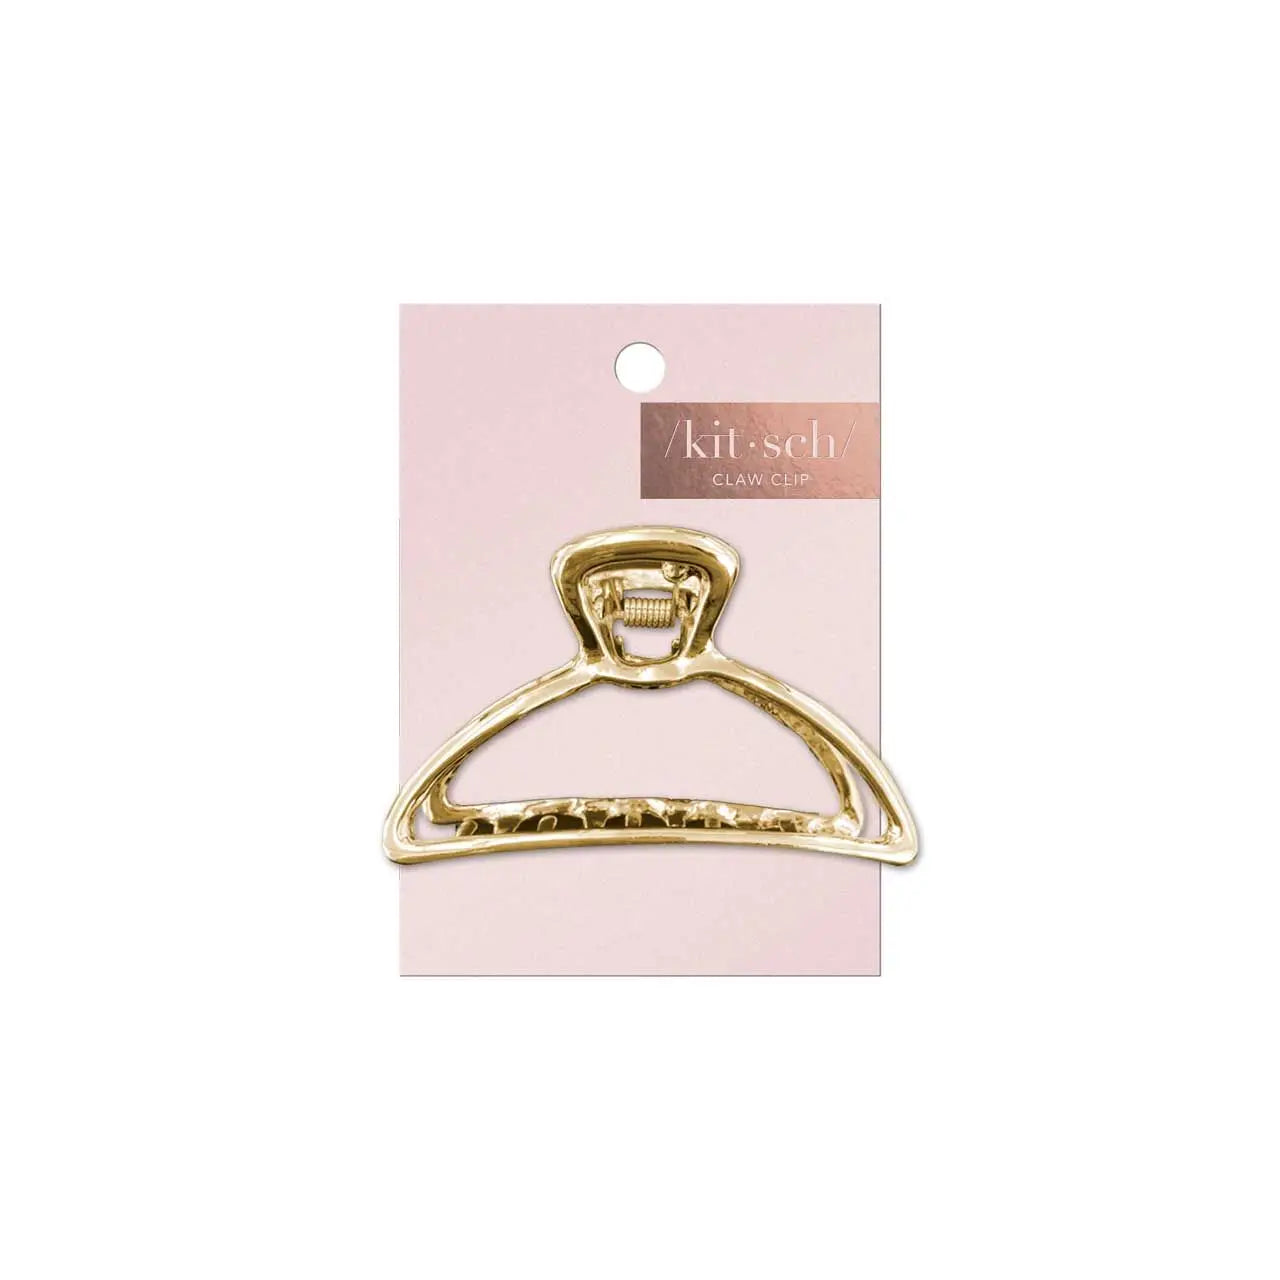 Kitsch- Open Shape Claw Clip - Gold